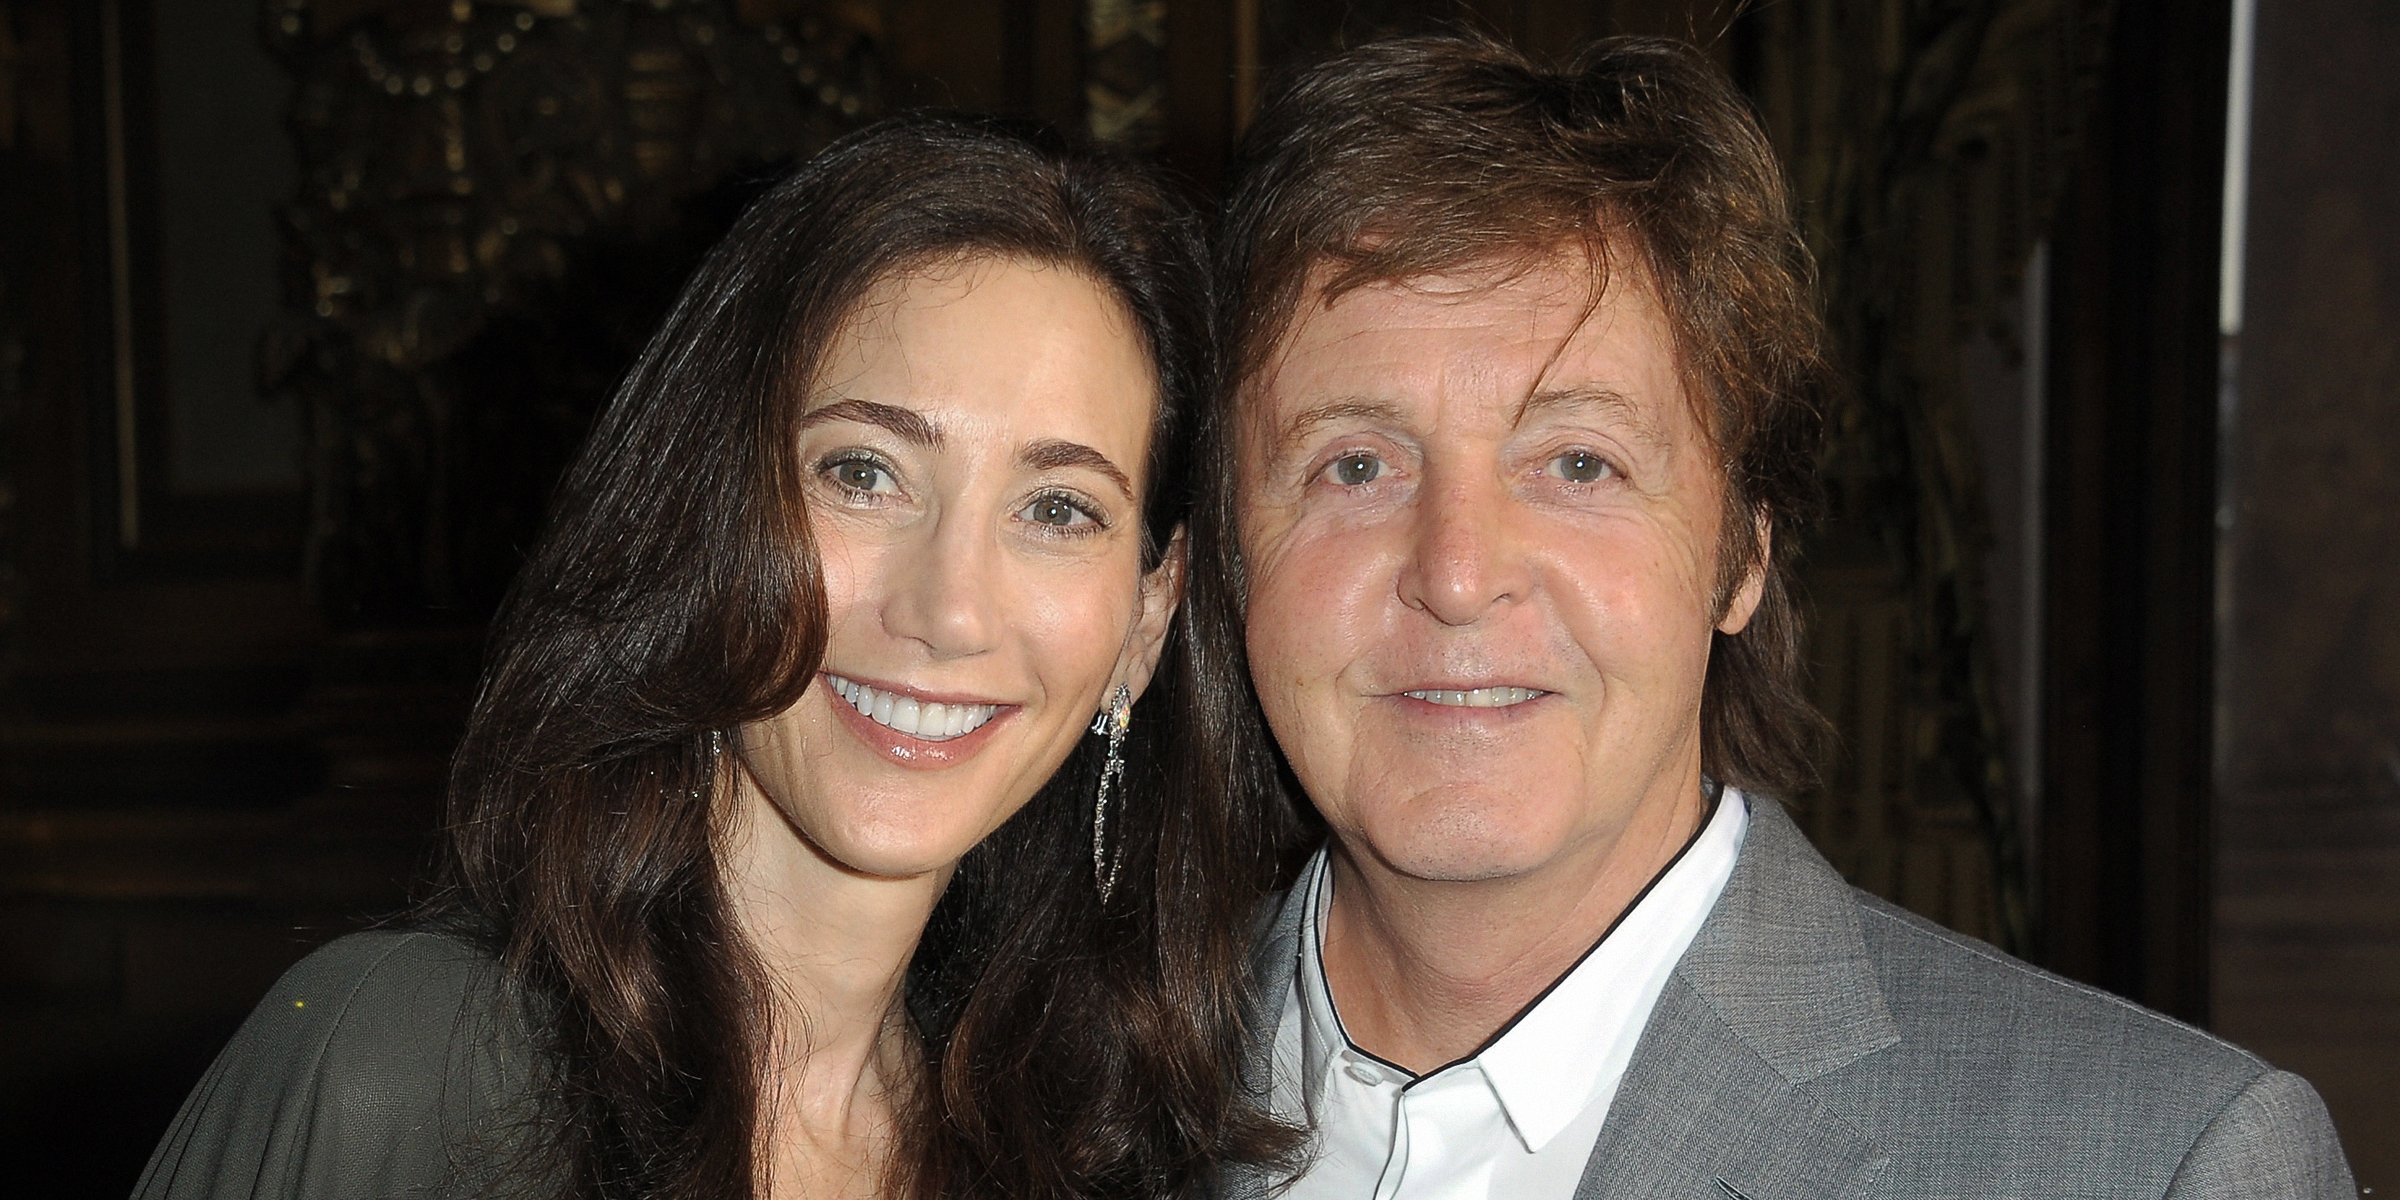 Nancy Shevell and Paul McCartney | Source: Getty Images